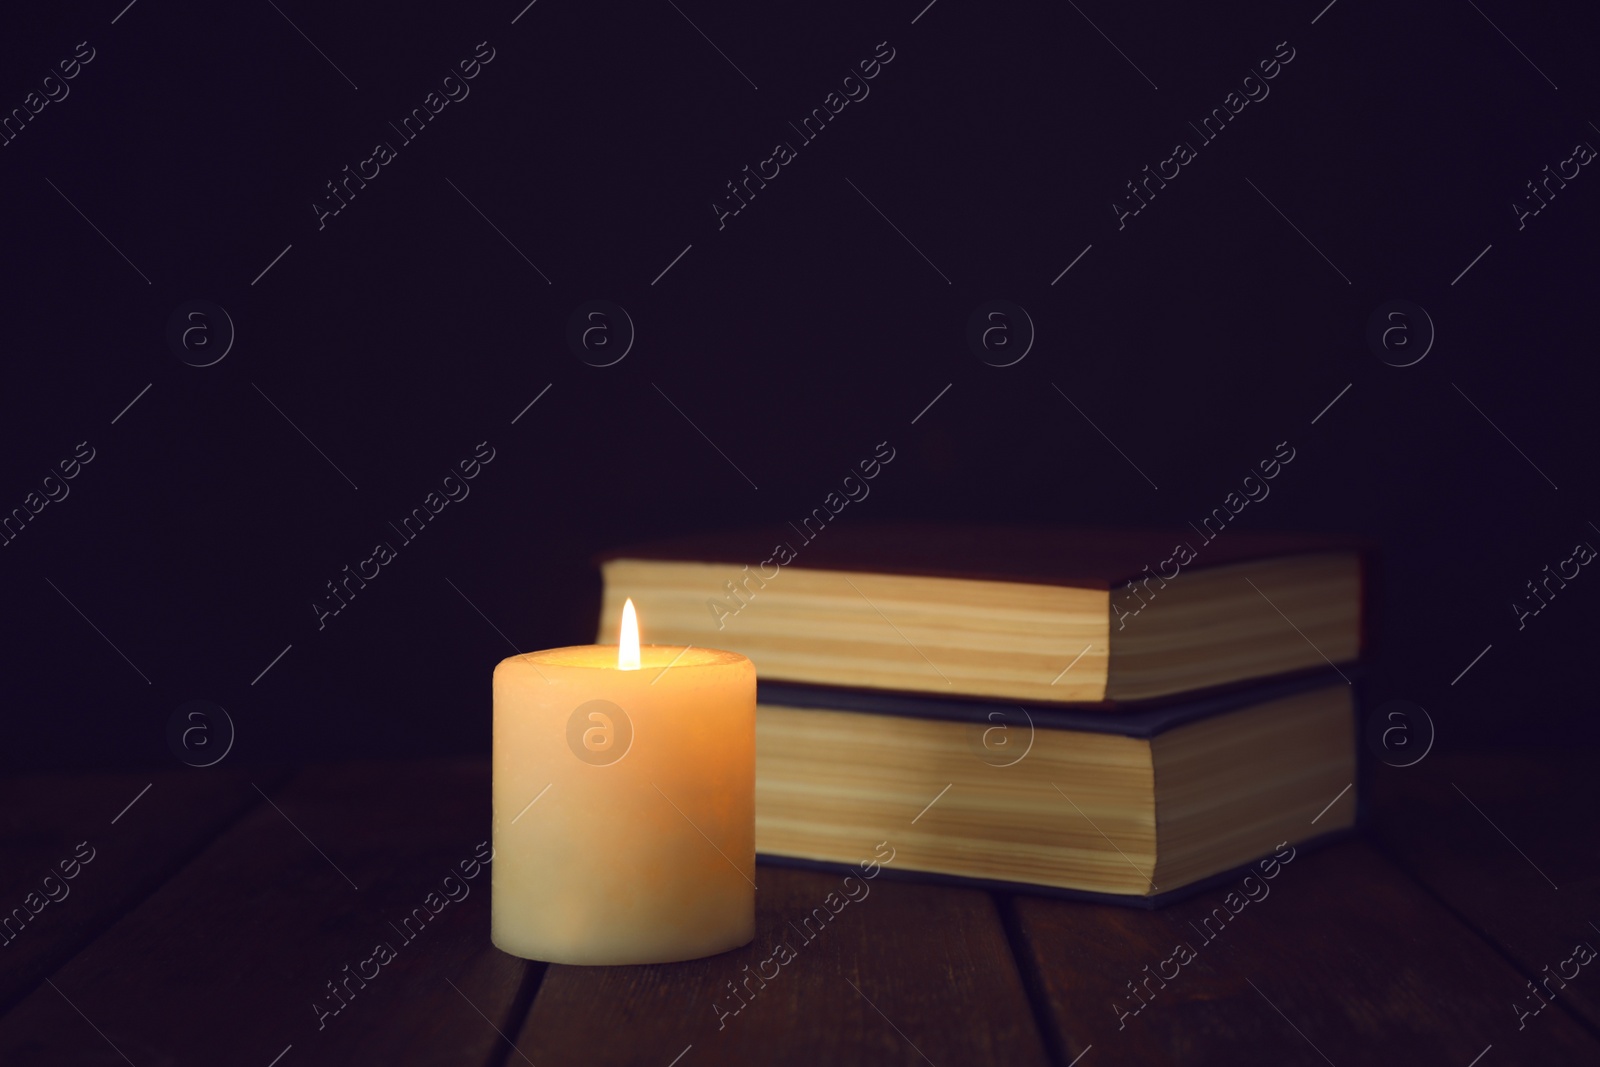 Photo of Burning candles and stack of books on wooden table in darkness